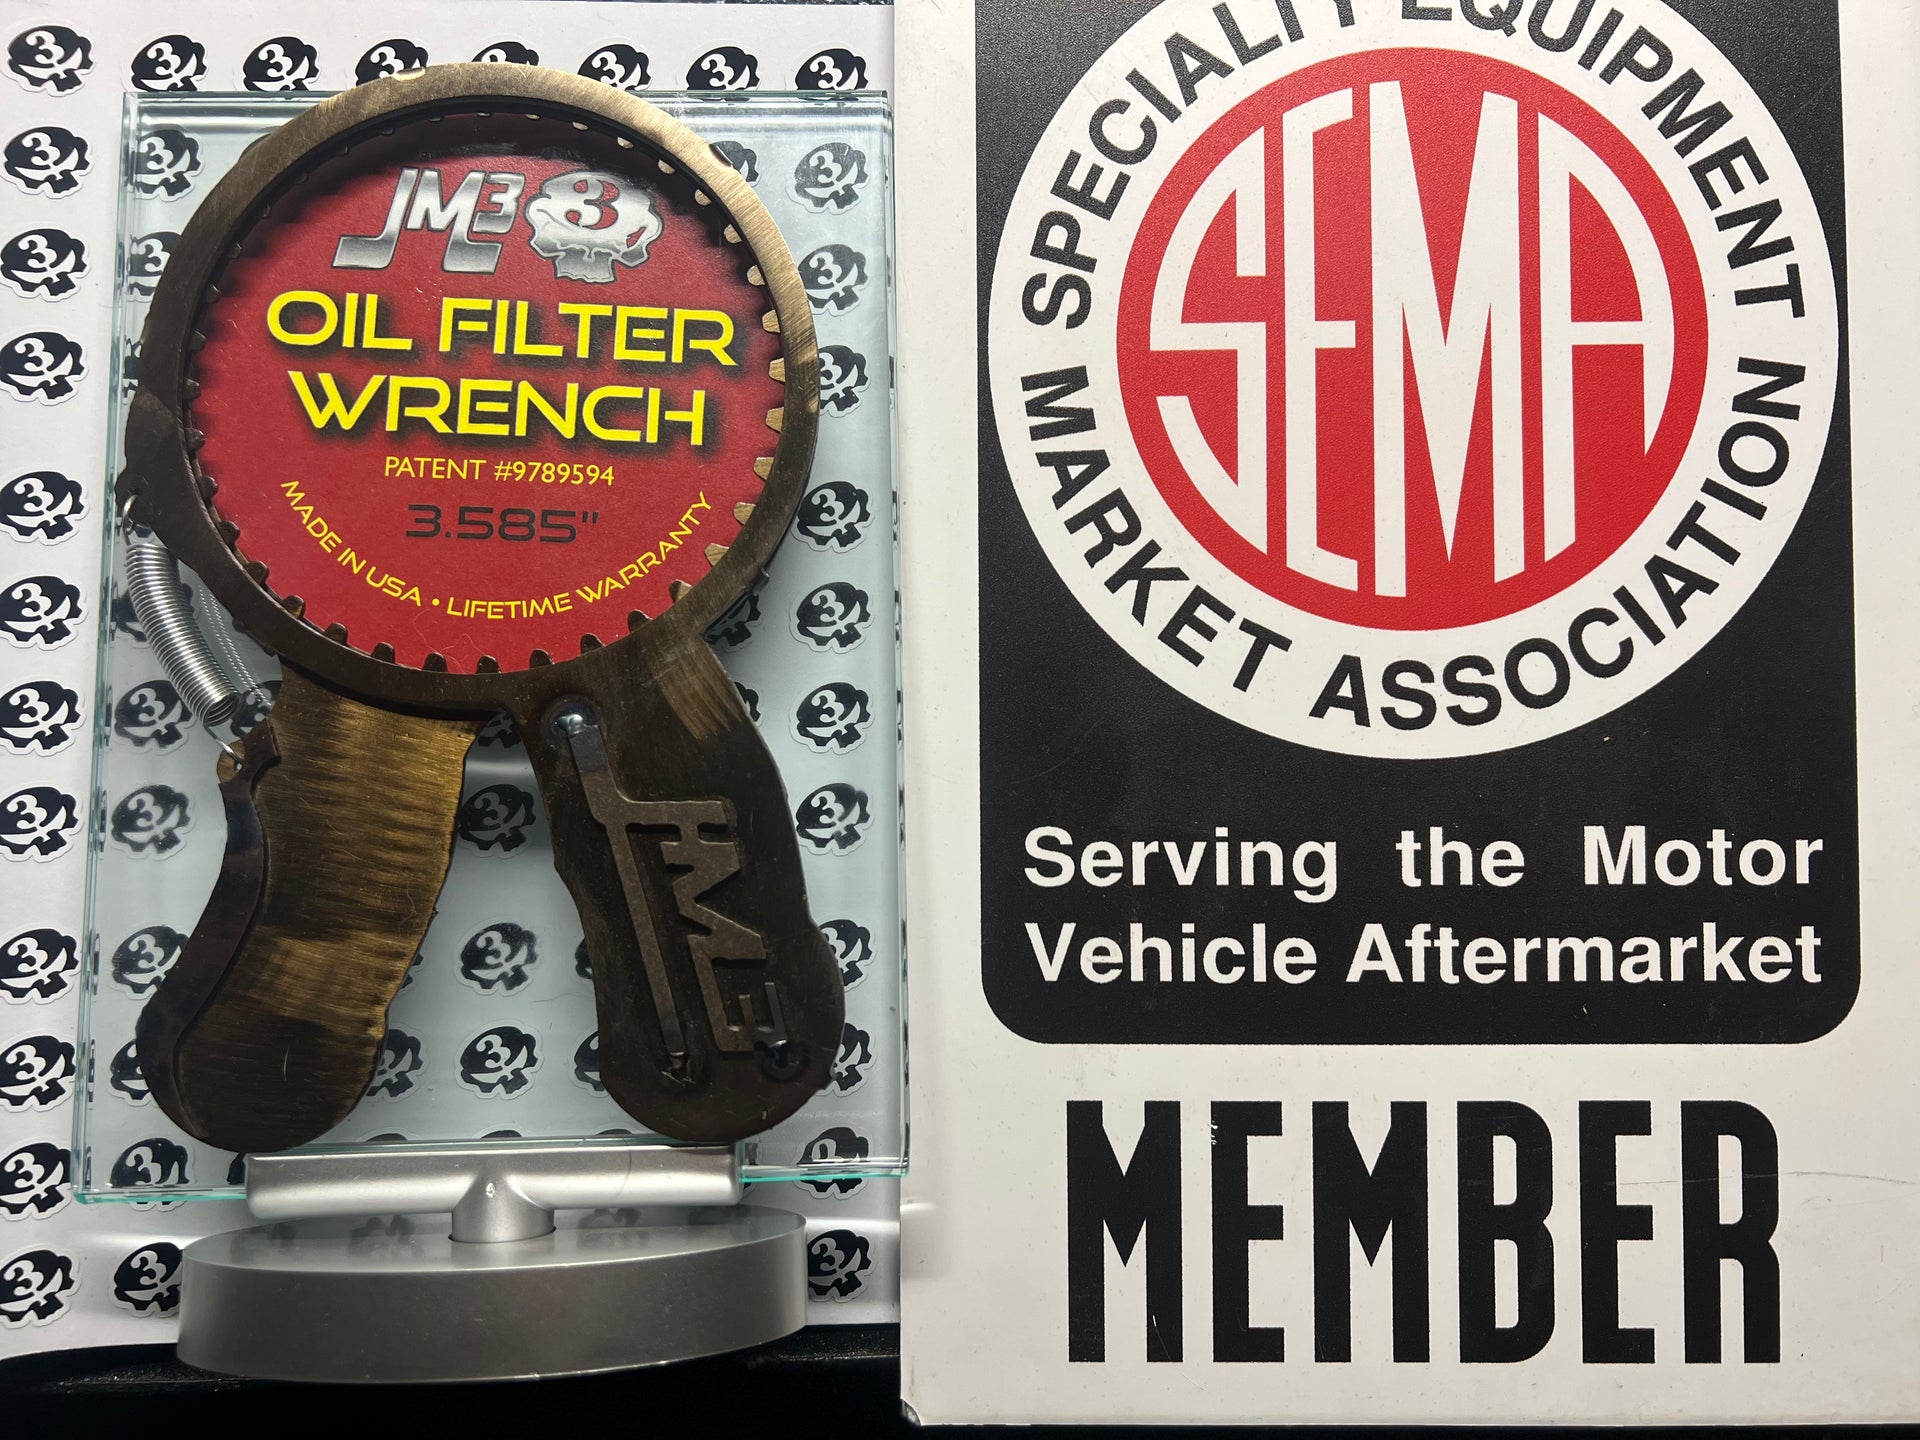 Load video: Proper way to use JM3 Oil Filter Wrench